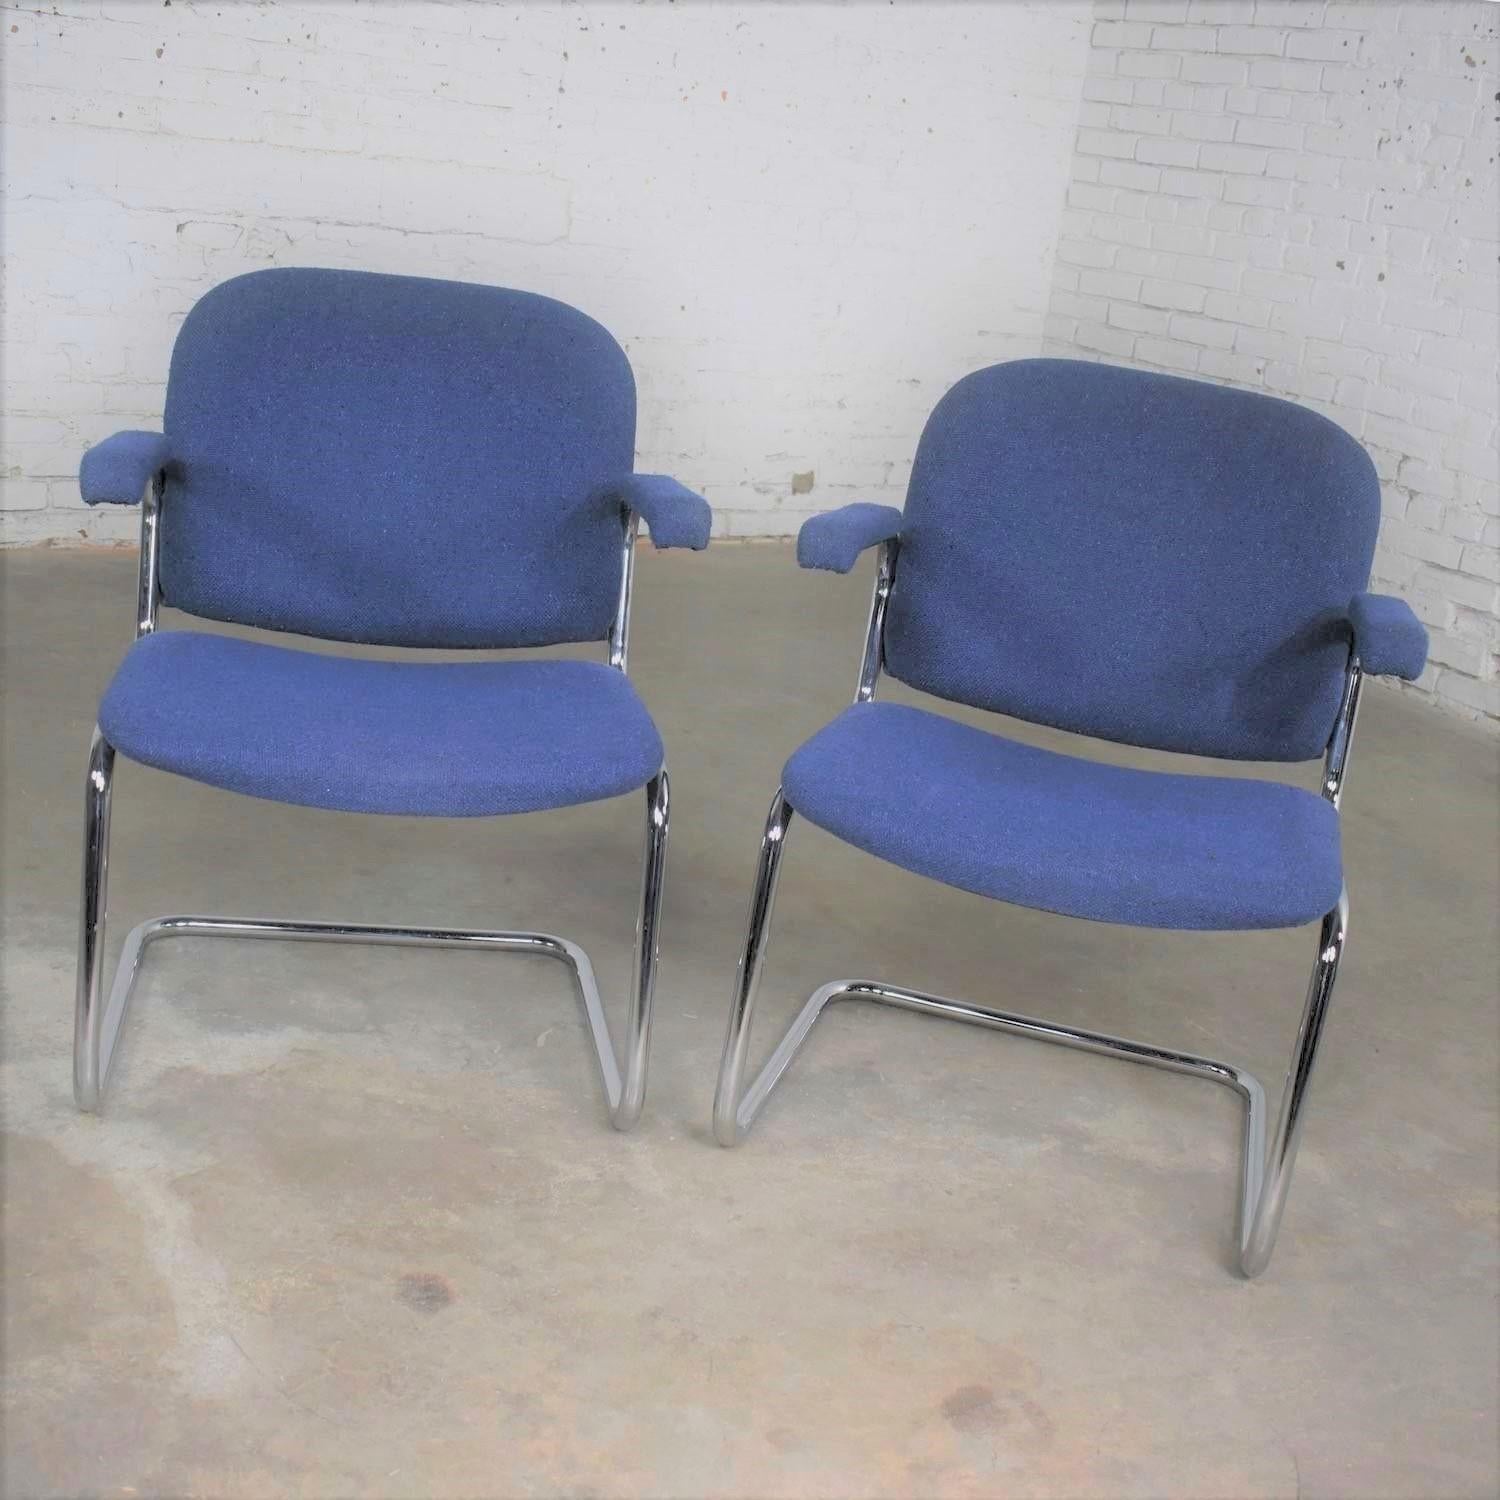 Tubular Chrome and Blue Fabric Cantilever Lounge Chair with Arms Set of 7 For Sale 3